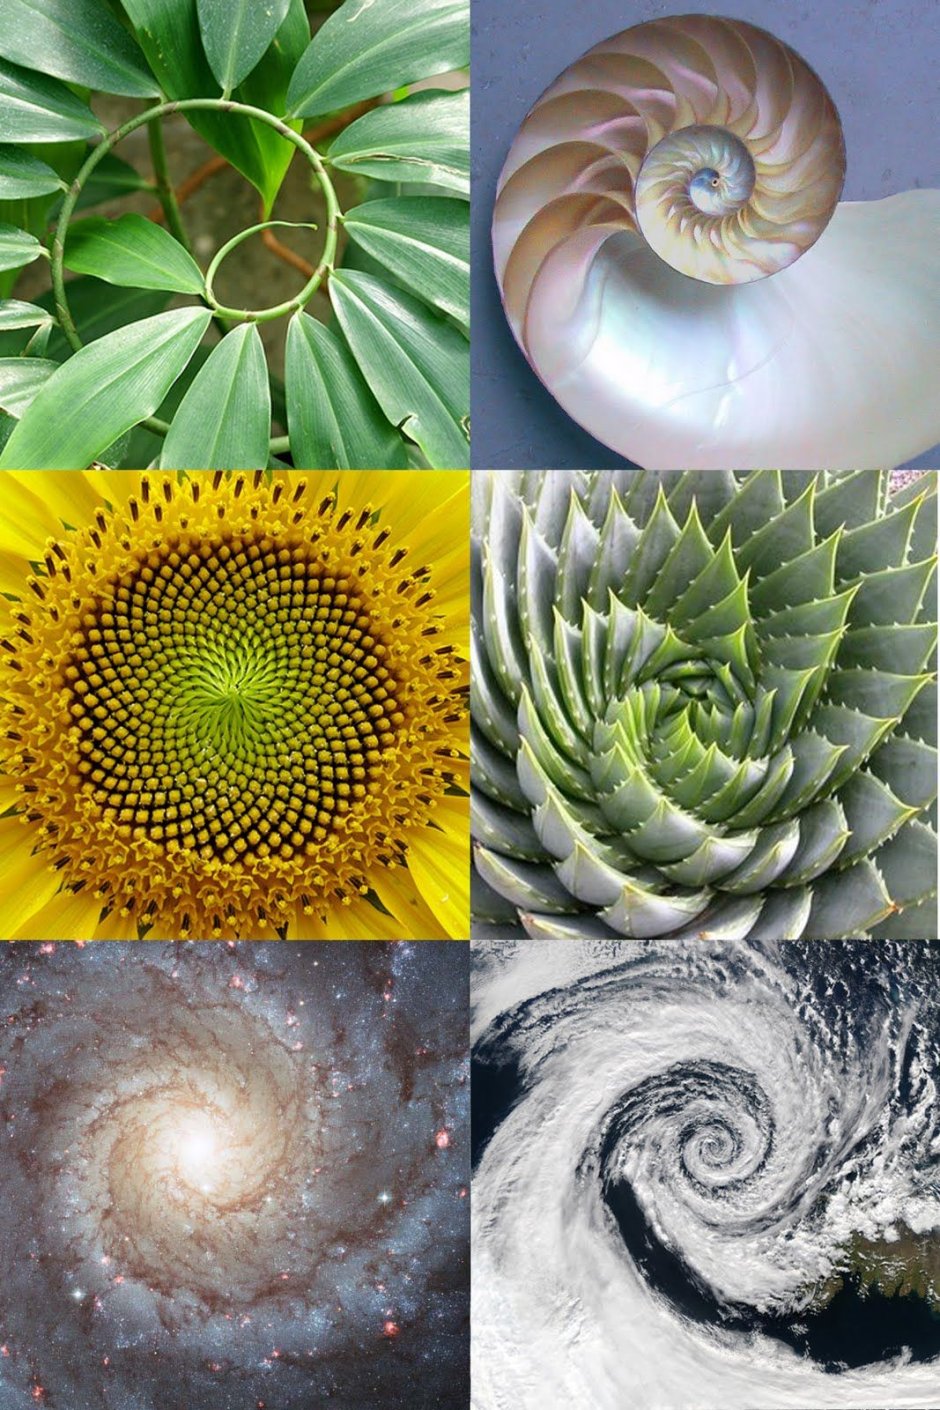 Fractals in nature